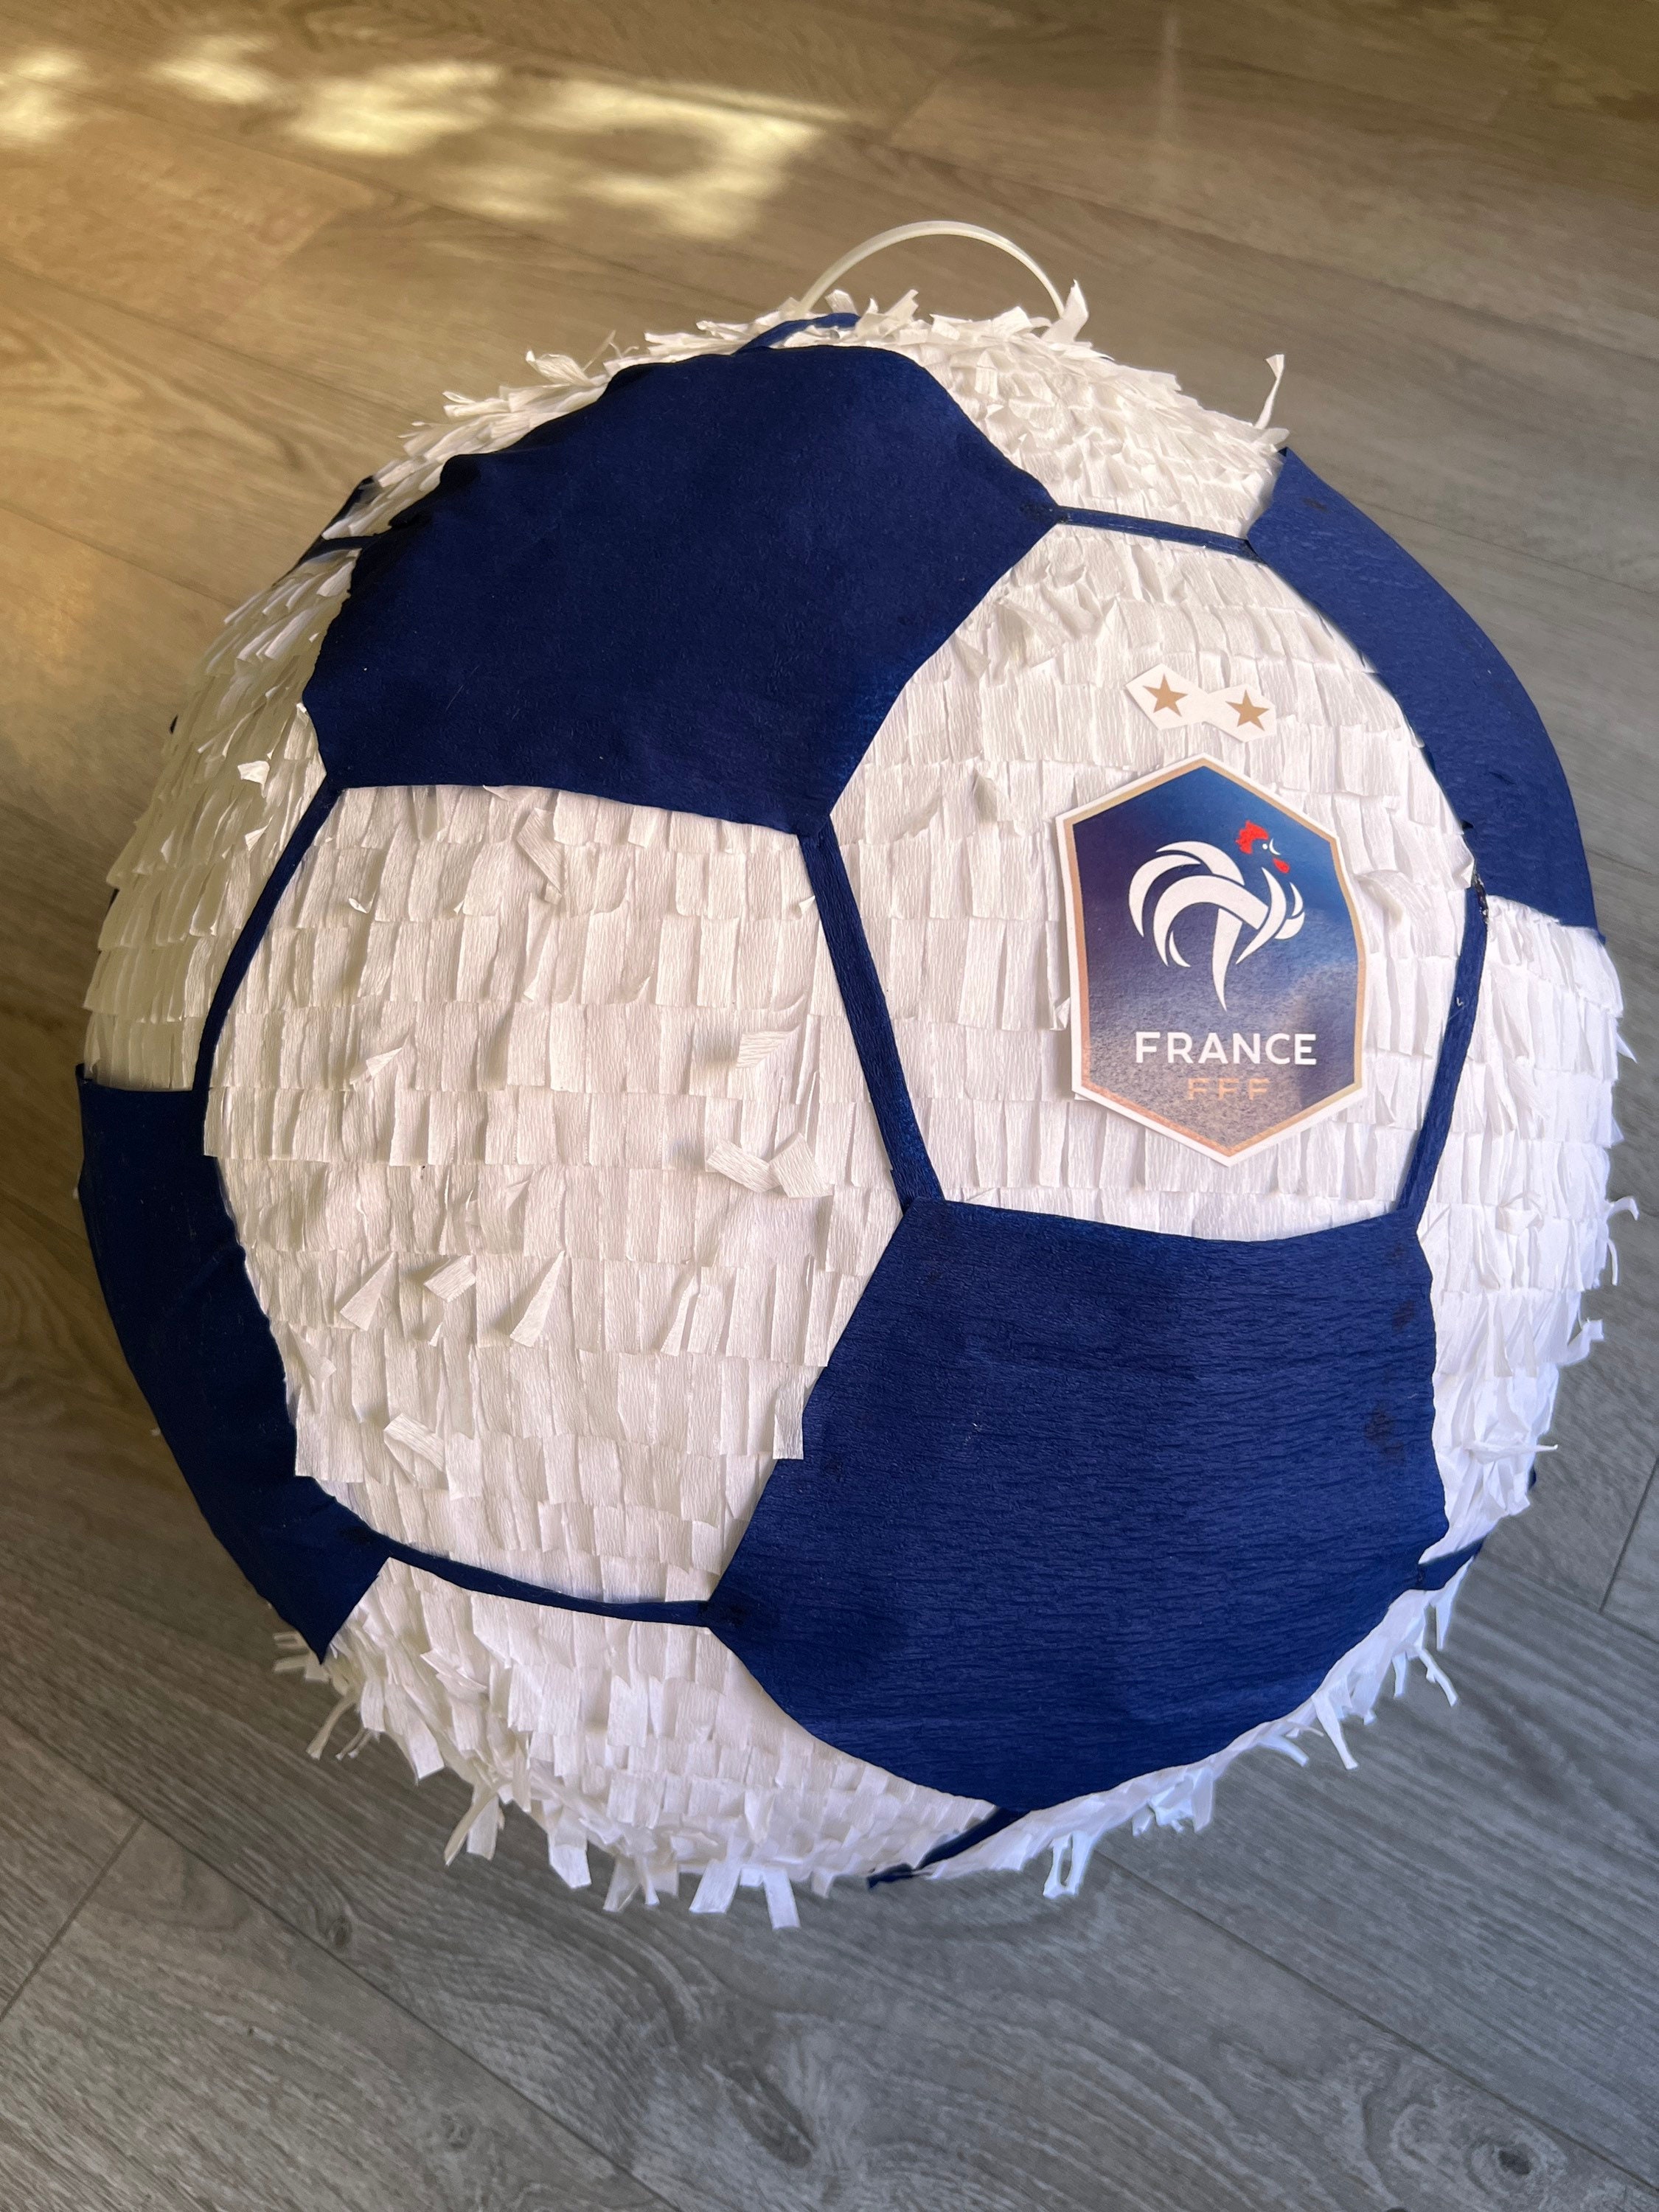 Piñata ball or soccer jersey, basketball, tennis, rugby